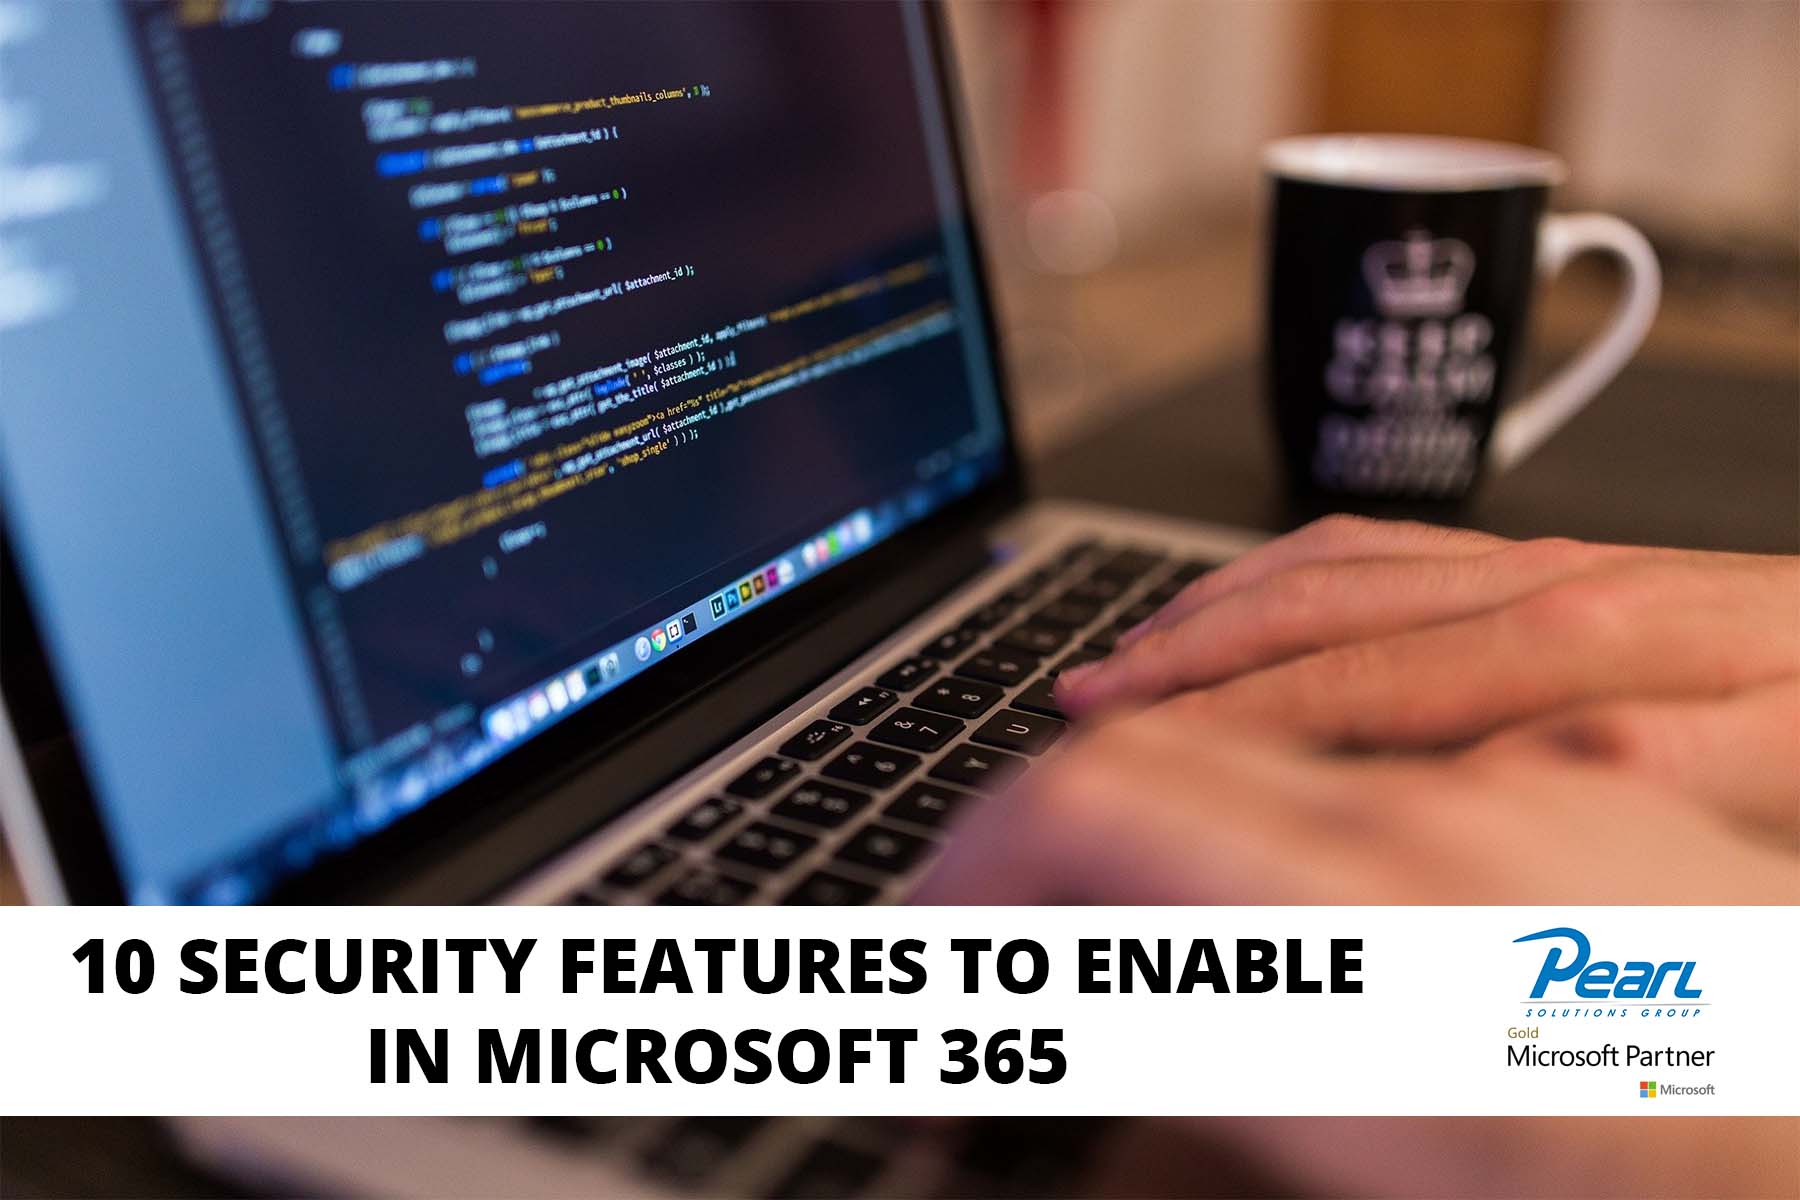 10 Security Features to Enable in Microsoft 365